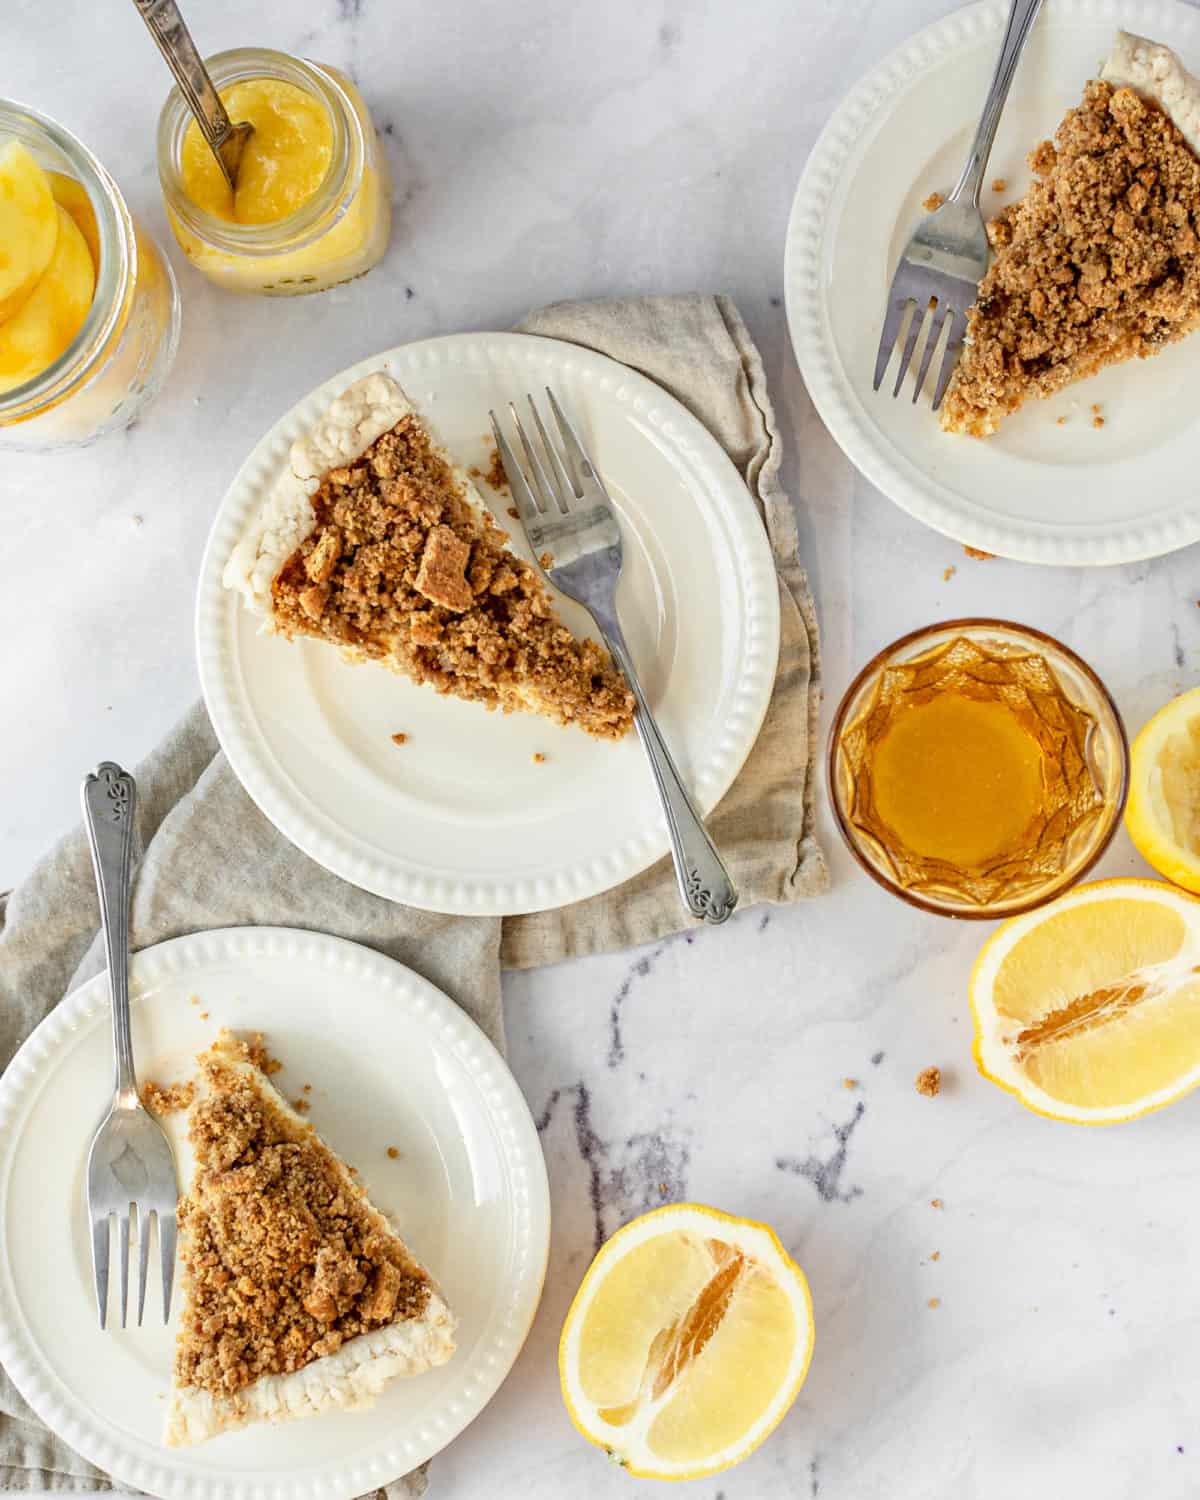 Three slices of lemon crunch pie on plates with forks on a table.